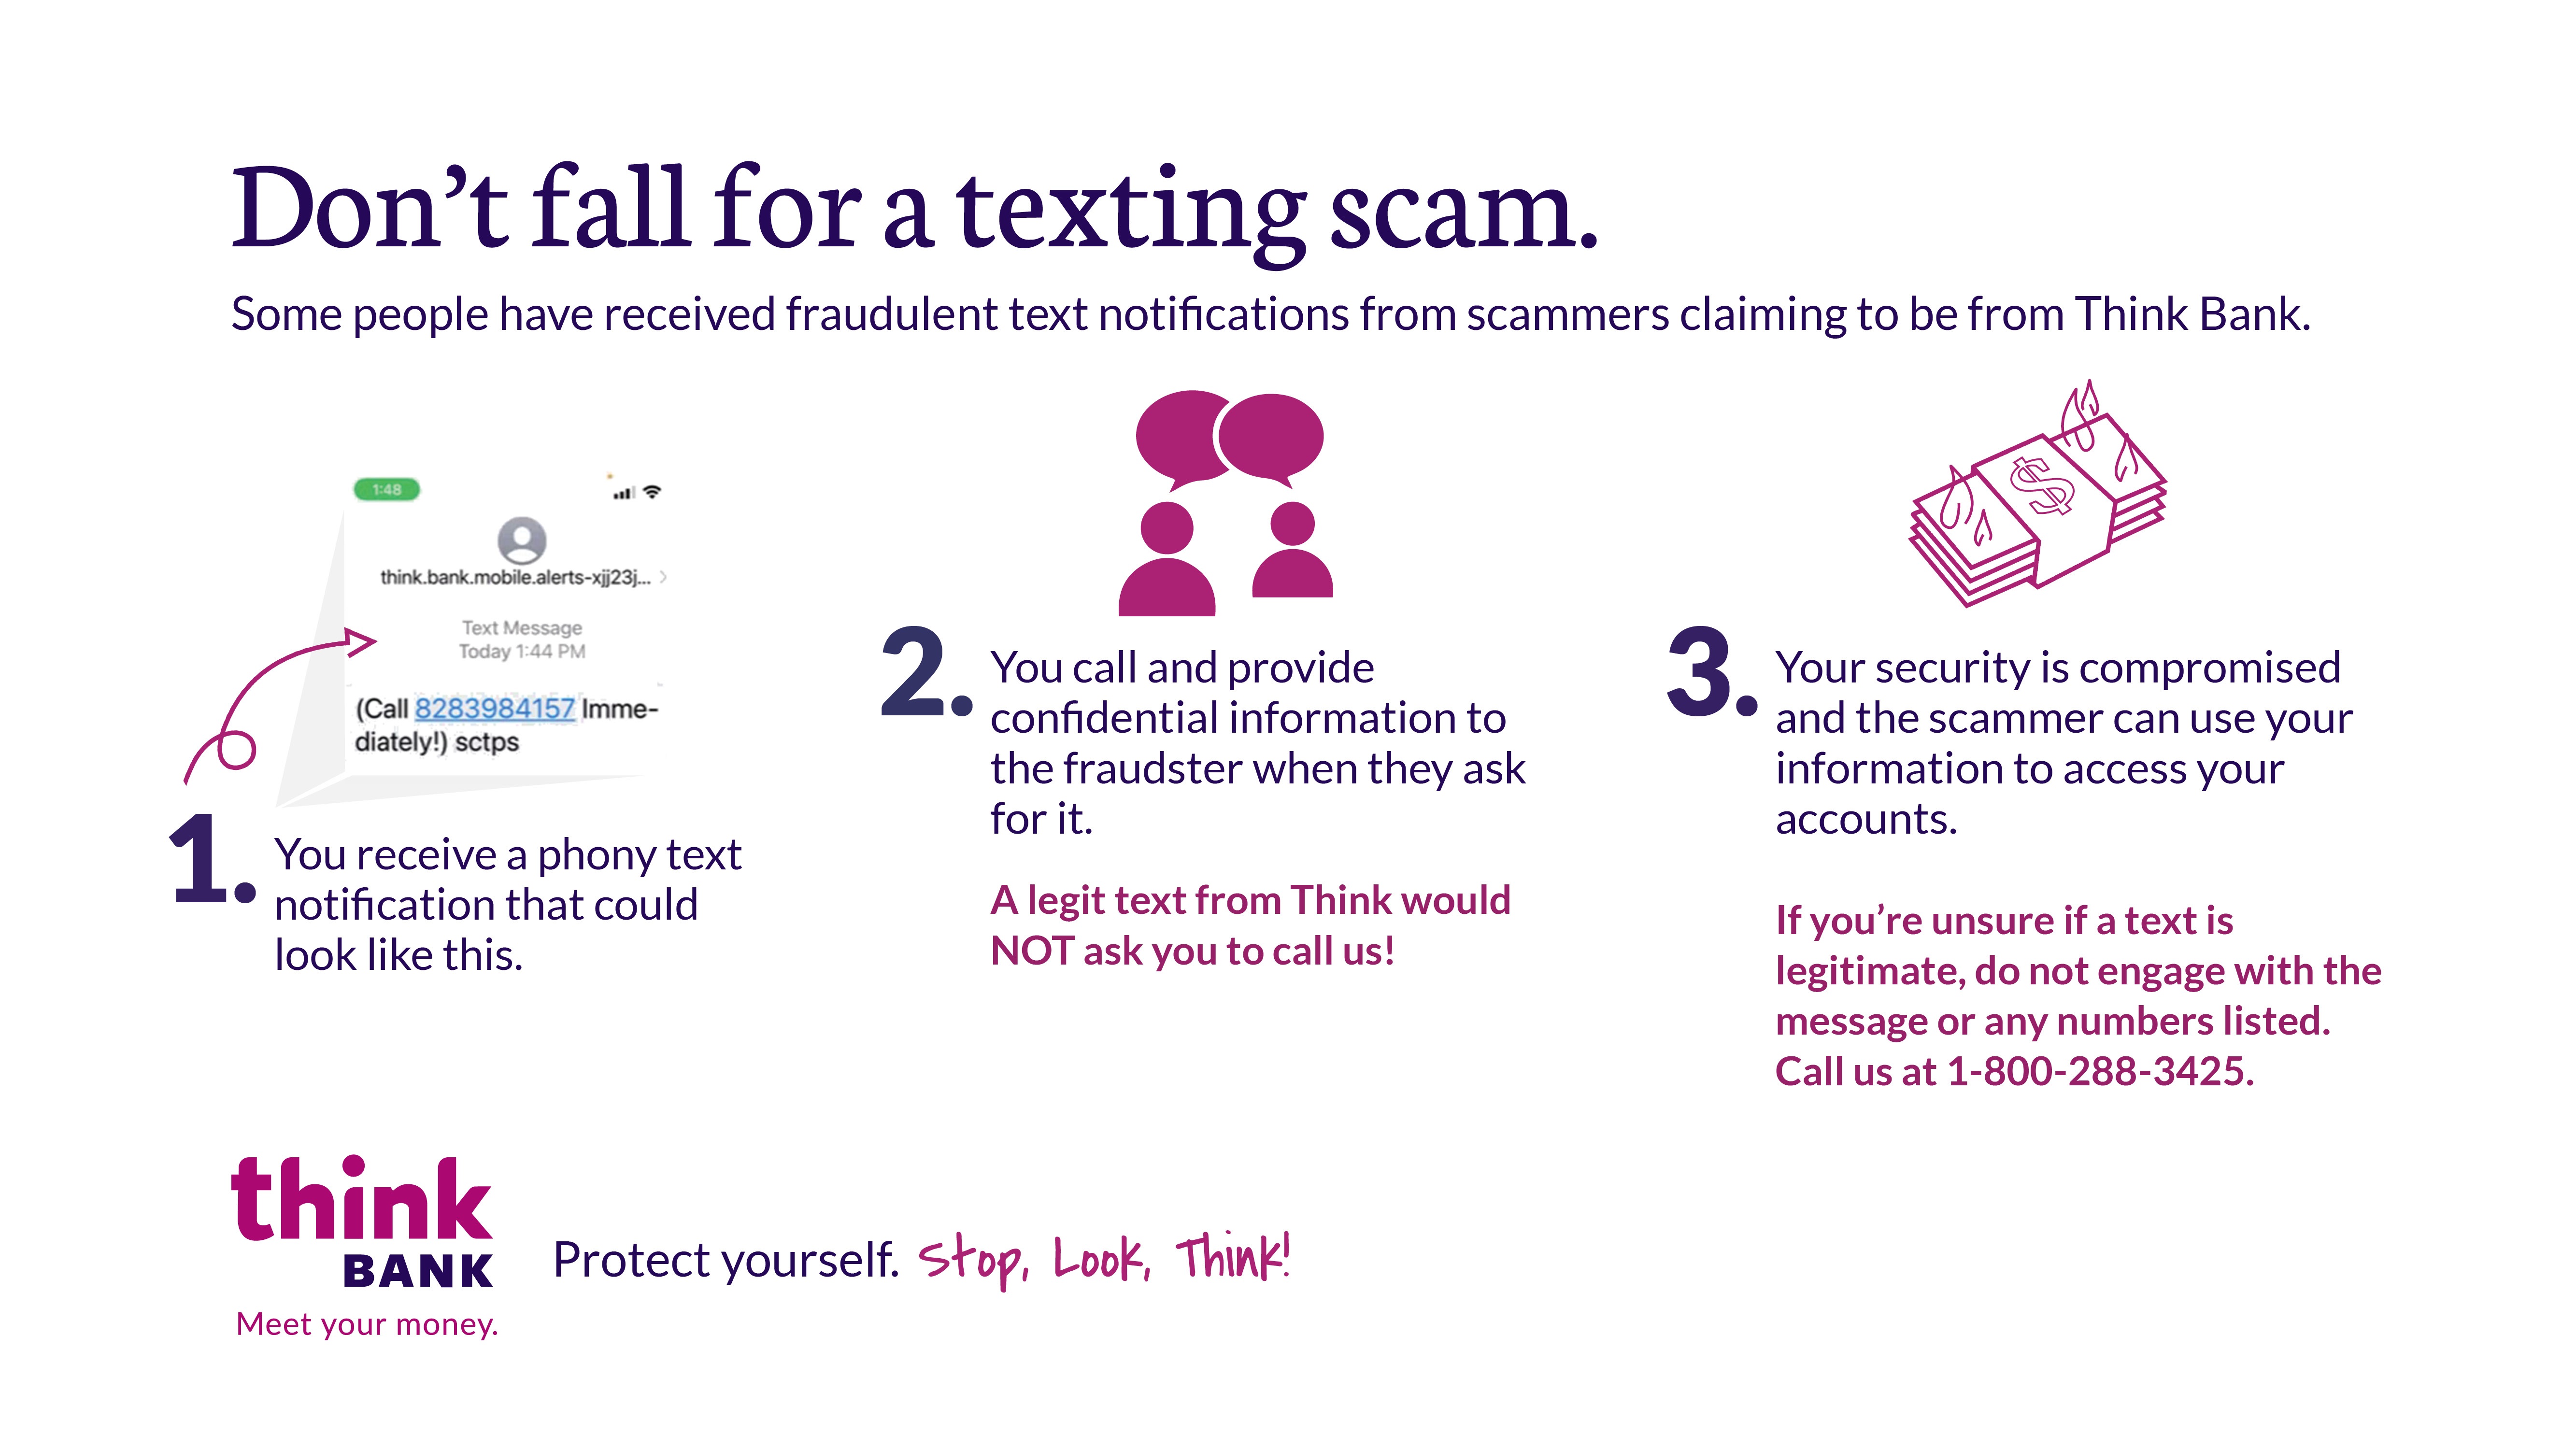 Don't fall for a texting scam.